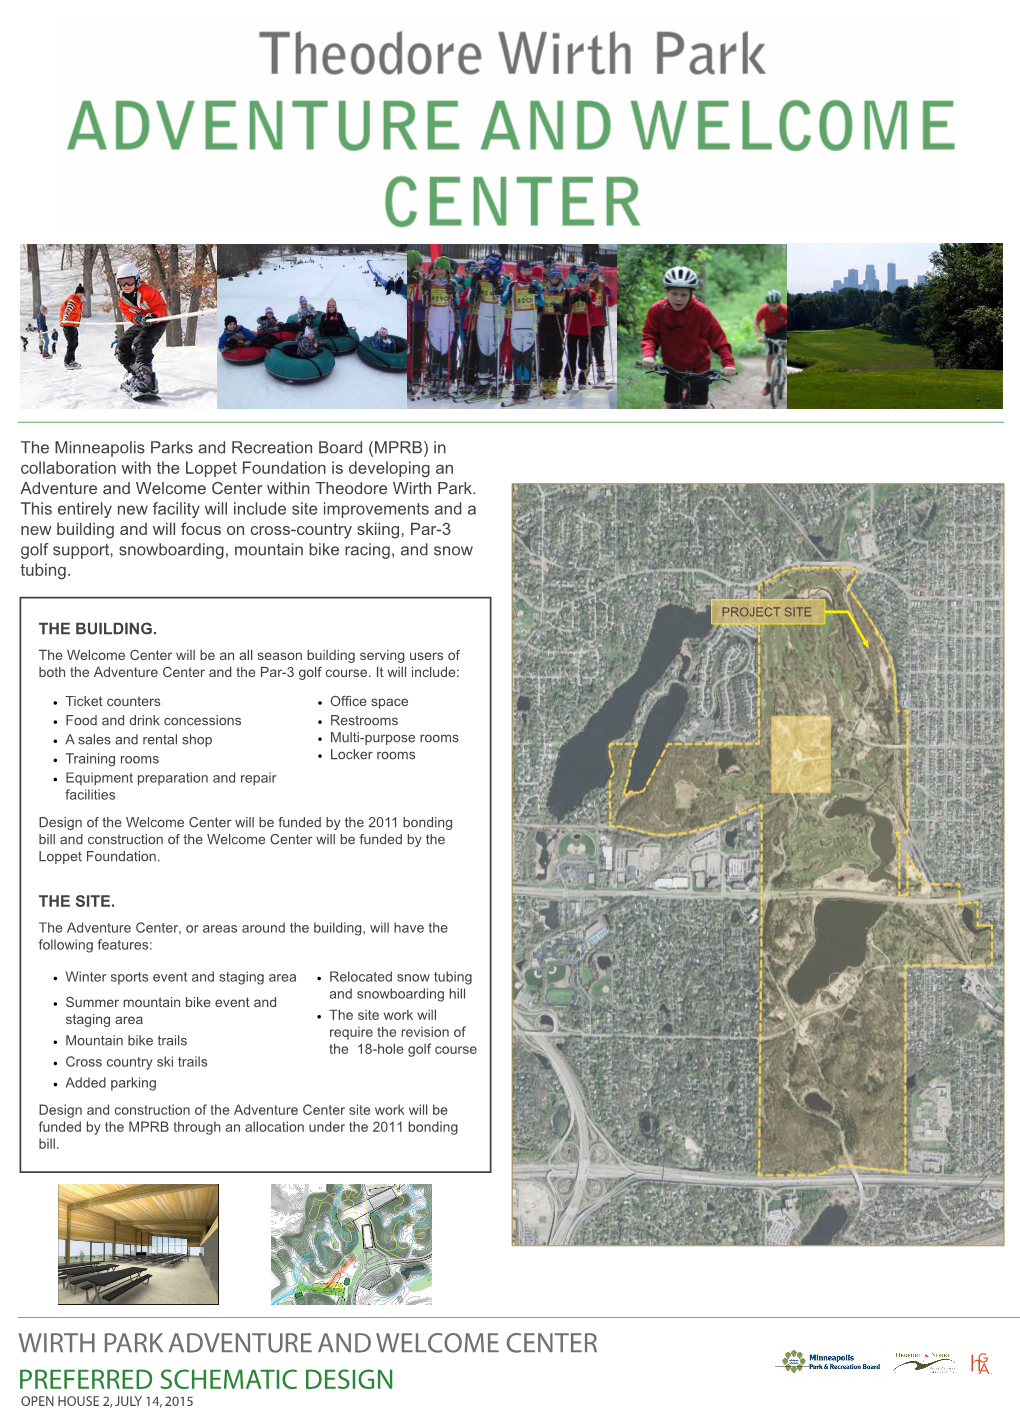 Wirth Park Adventure and Welcome Center Preferred Schematic Design Open House 2, July 14, 2015 Beginner Snow- Boarding